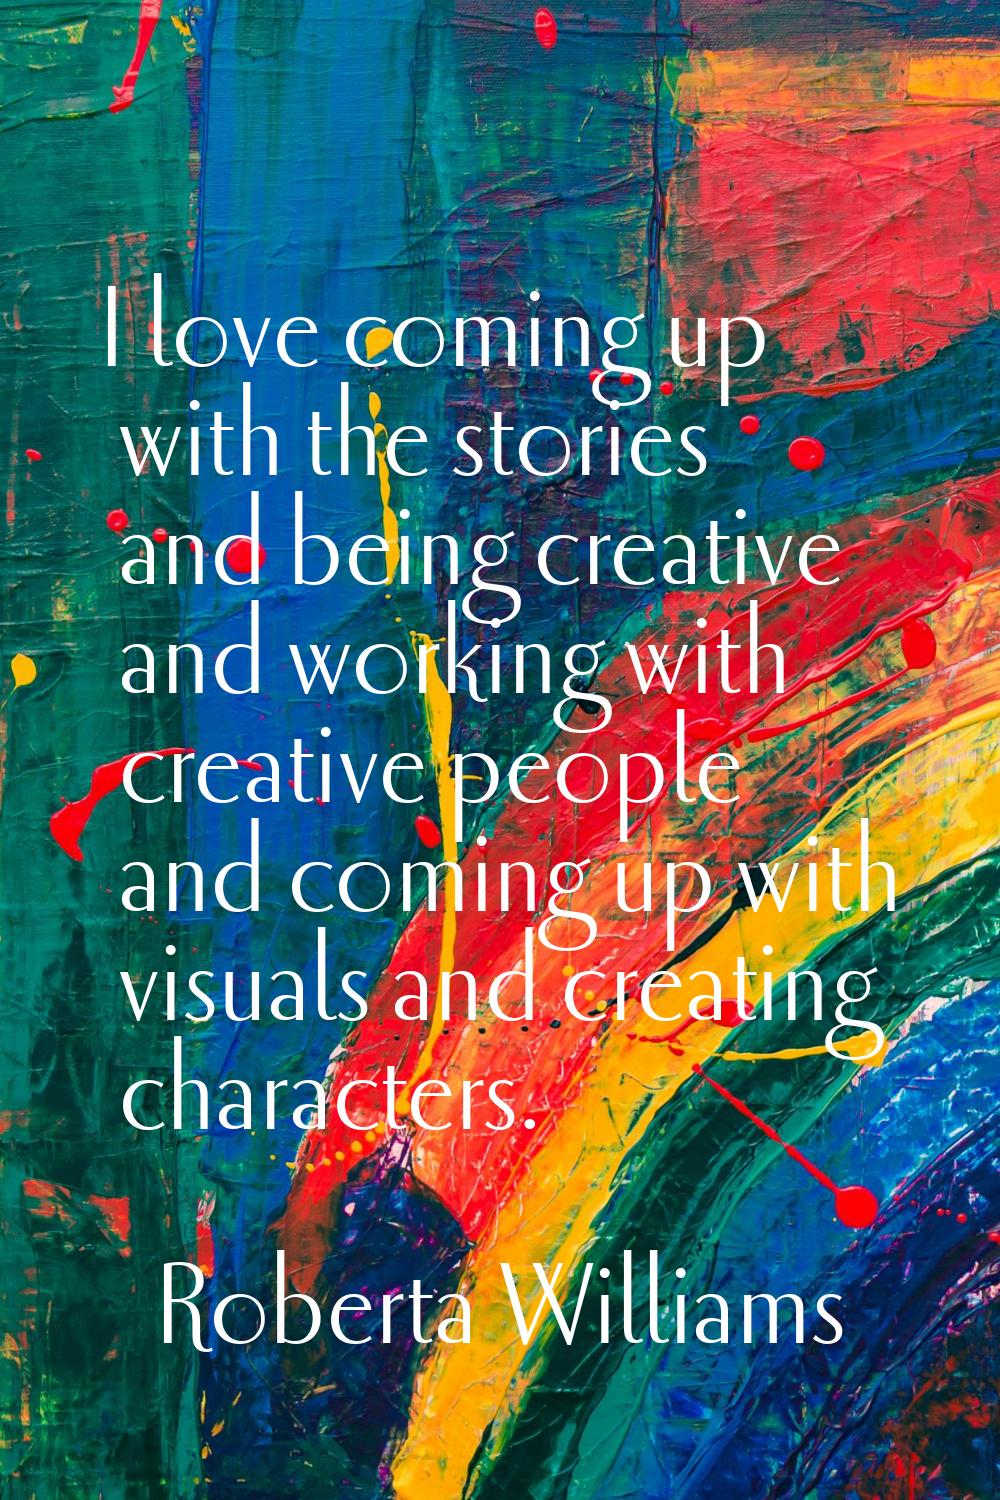 I love coming up with the stories and being creative and working with creative people and coming up